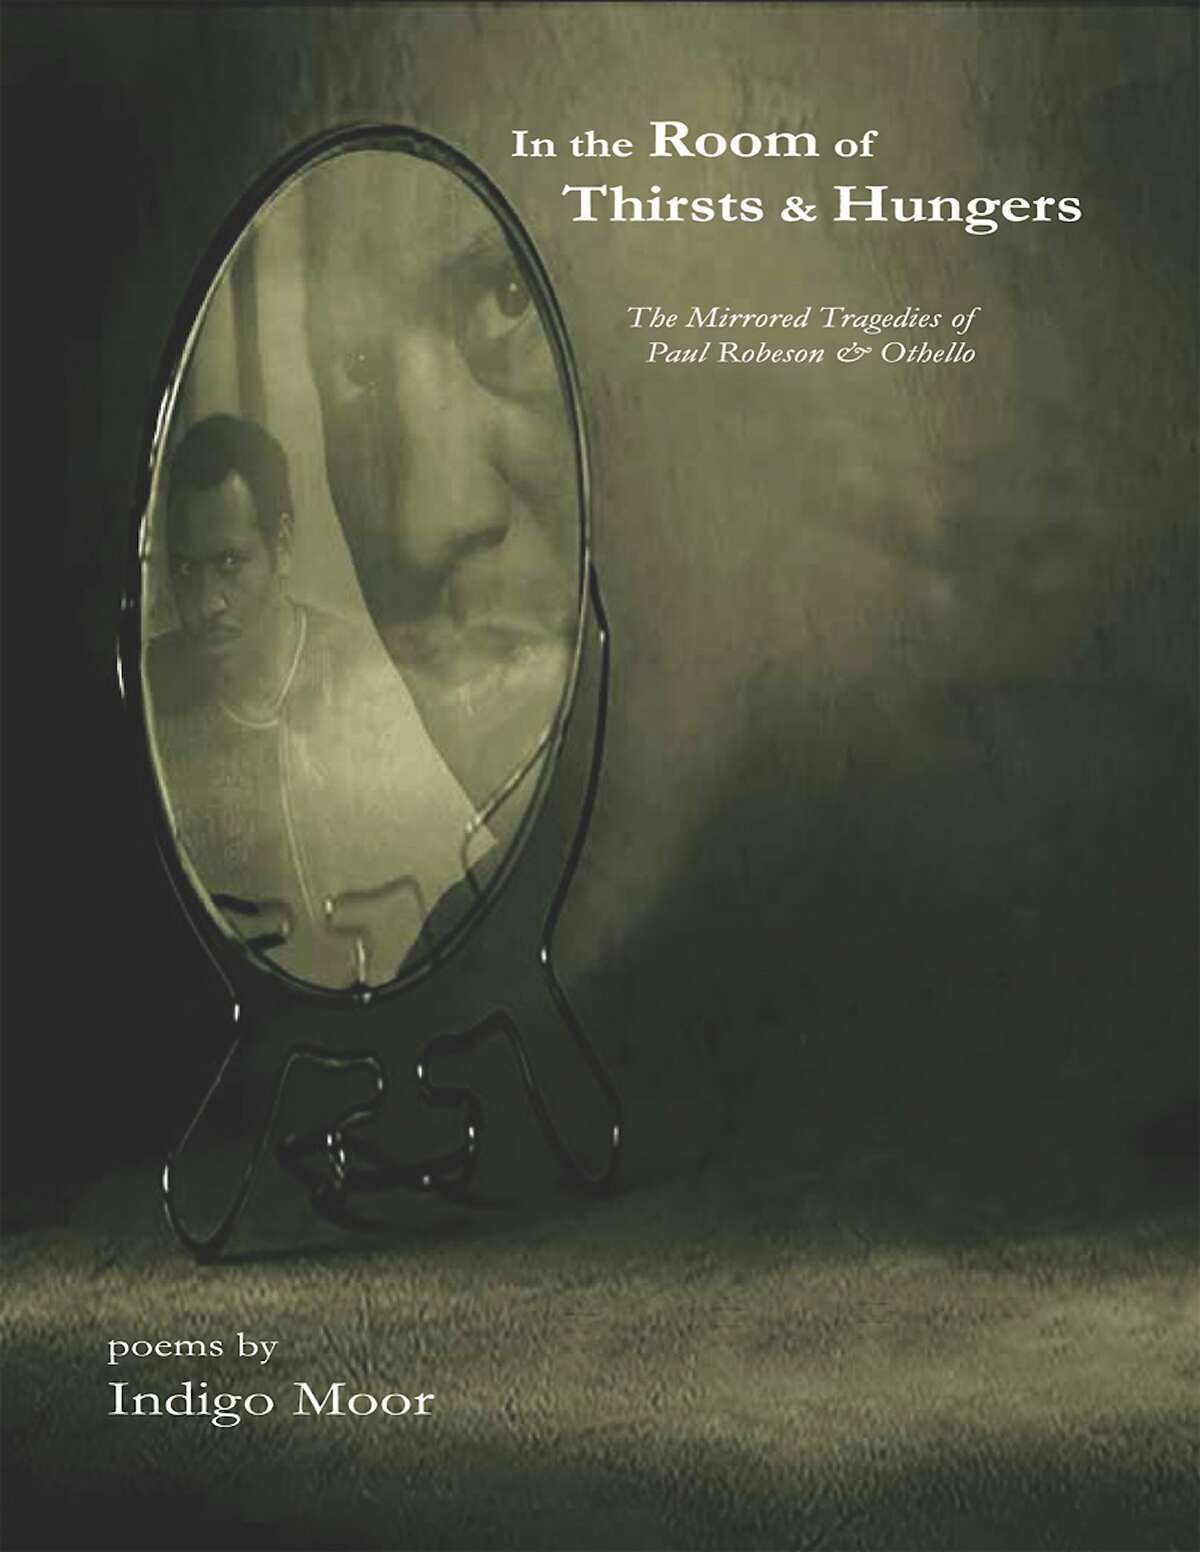 Indigo Moor's new book of poems, "In the Room of Thirsts and Hungers."